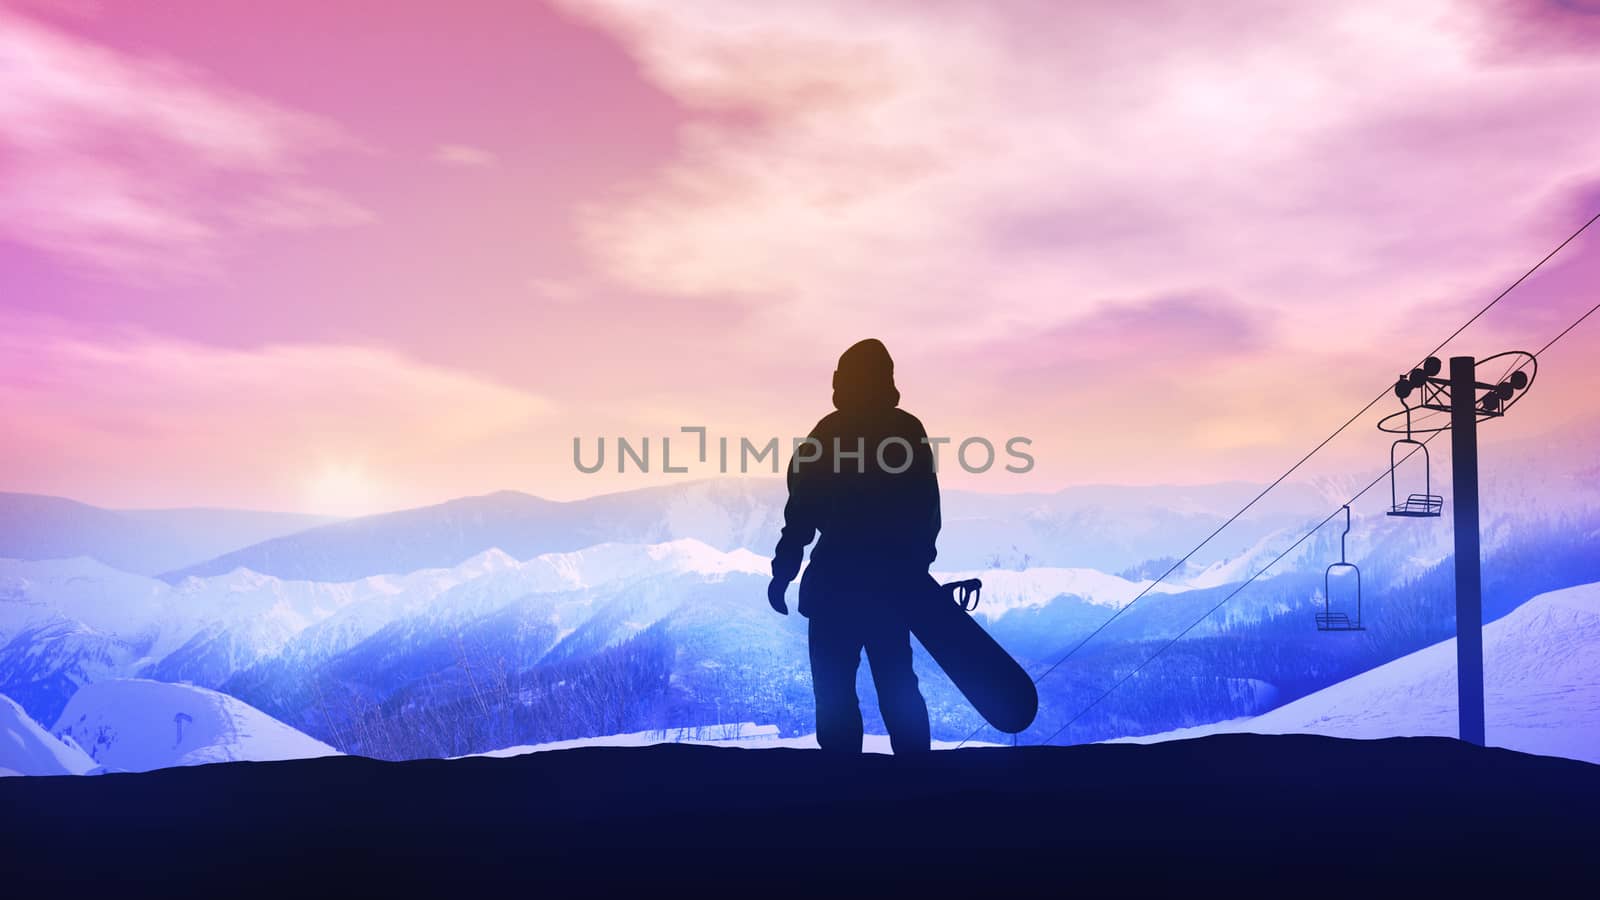 Against the backdrop of a bright purple sunset in the mountains stands a dark silhouette of a snowboarder.